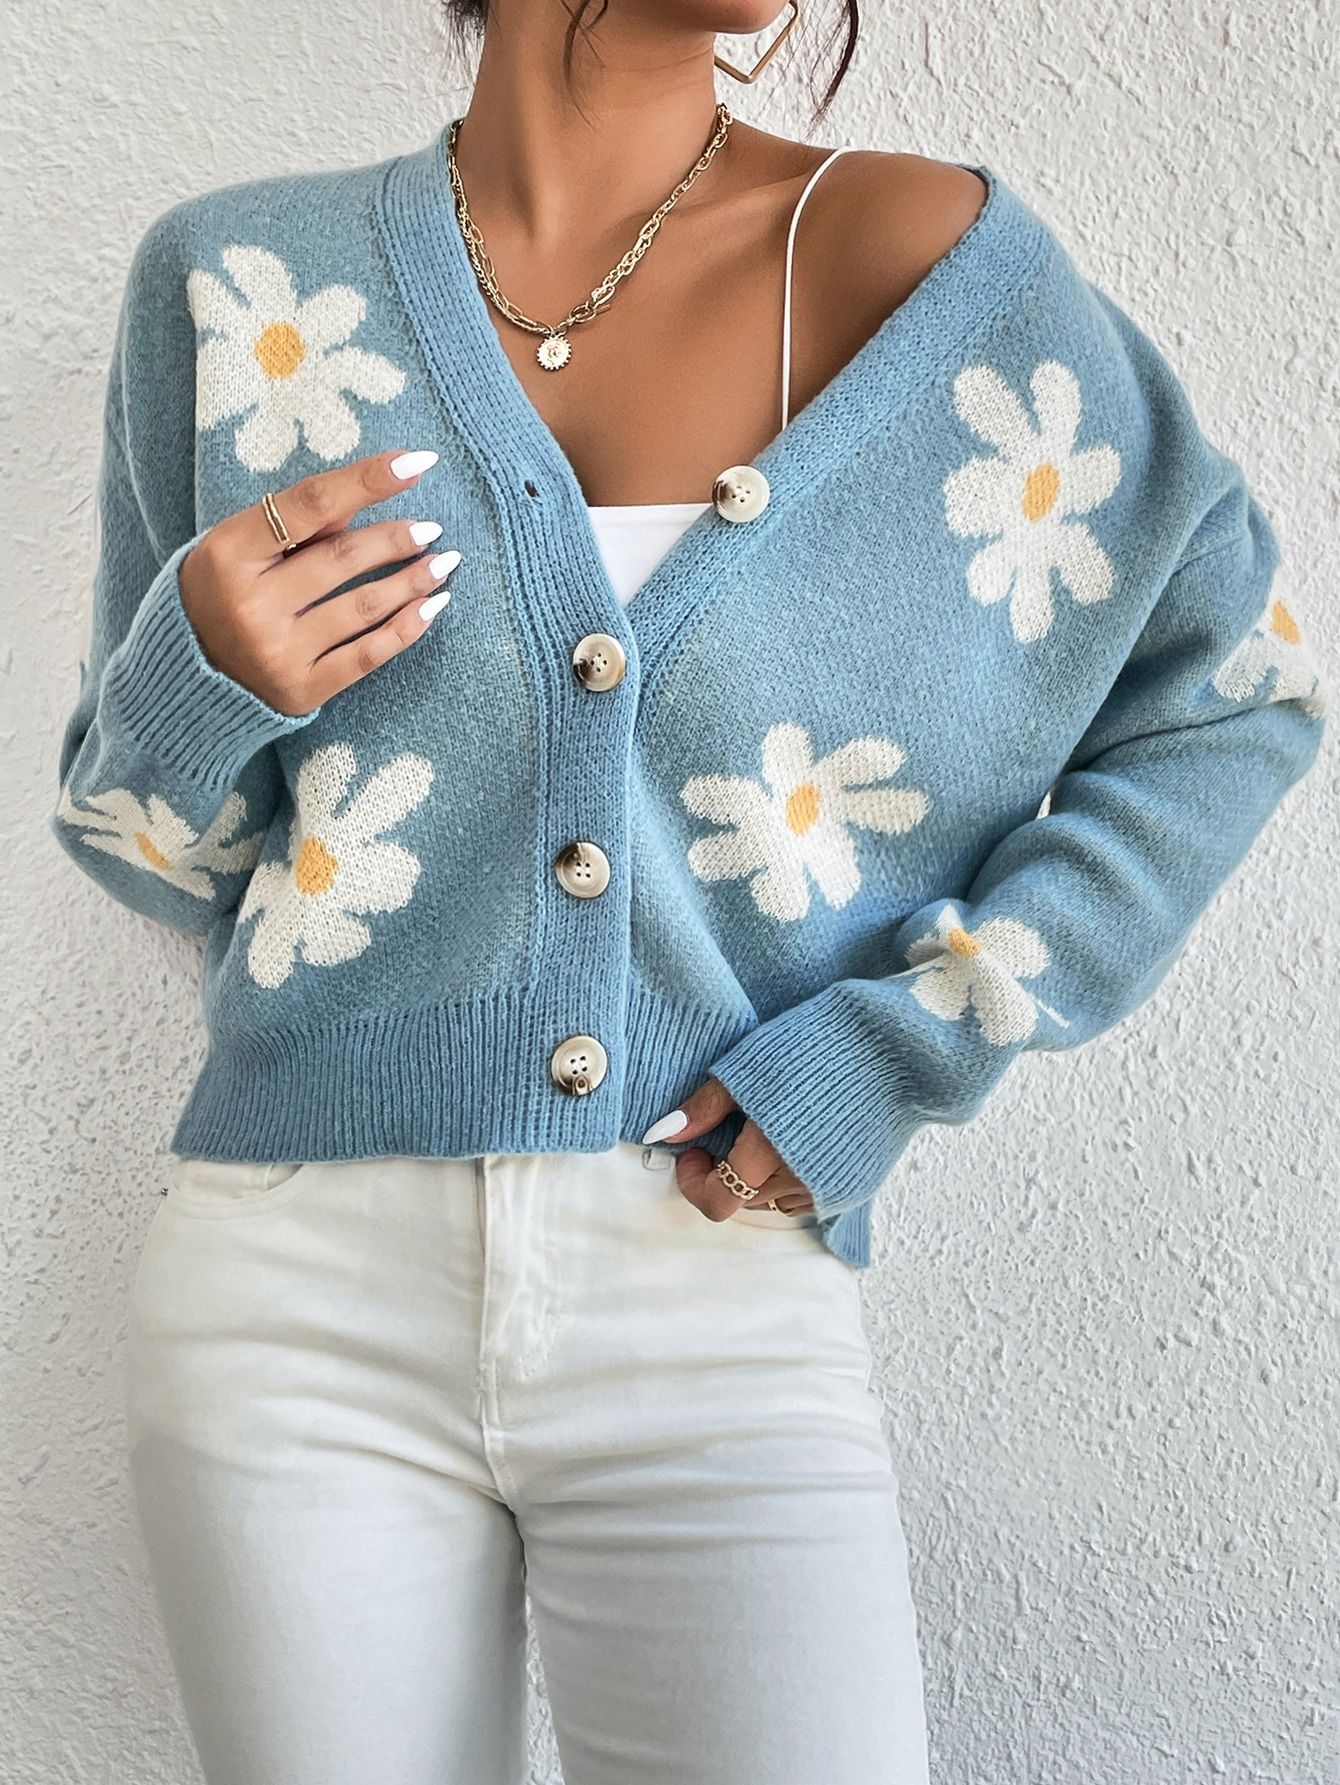 Ways to Style a Floral Cardigan This
Spring